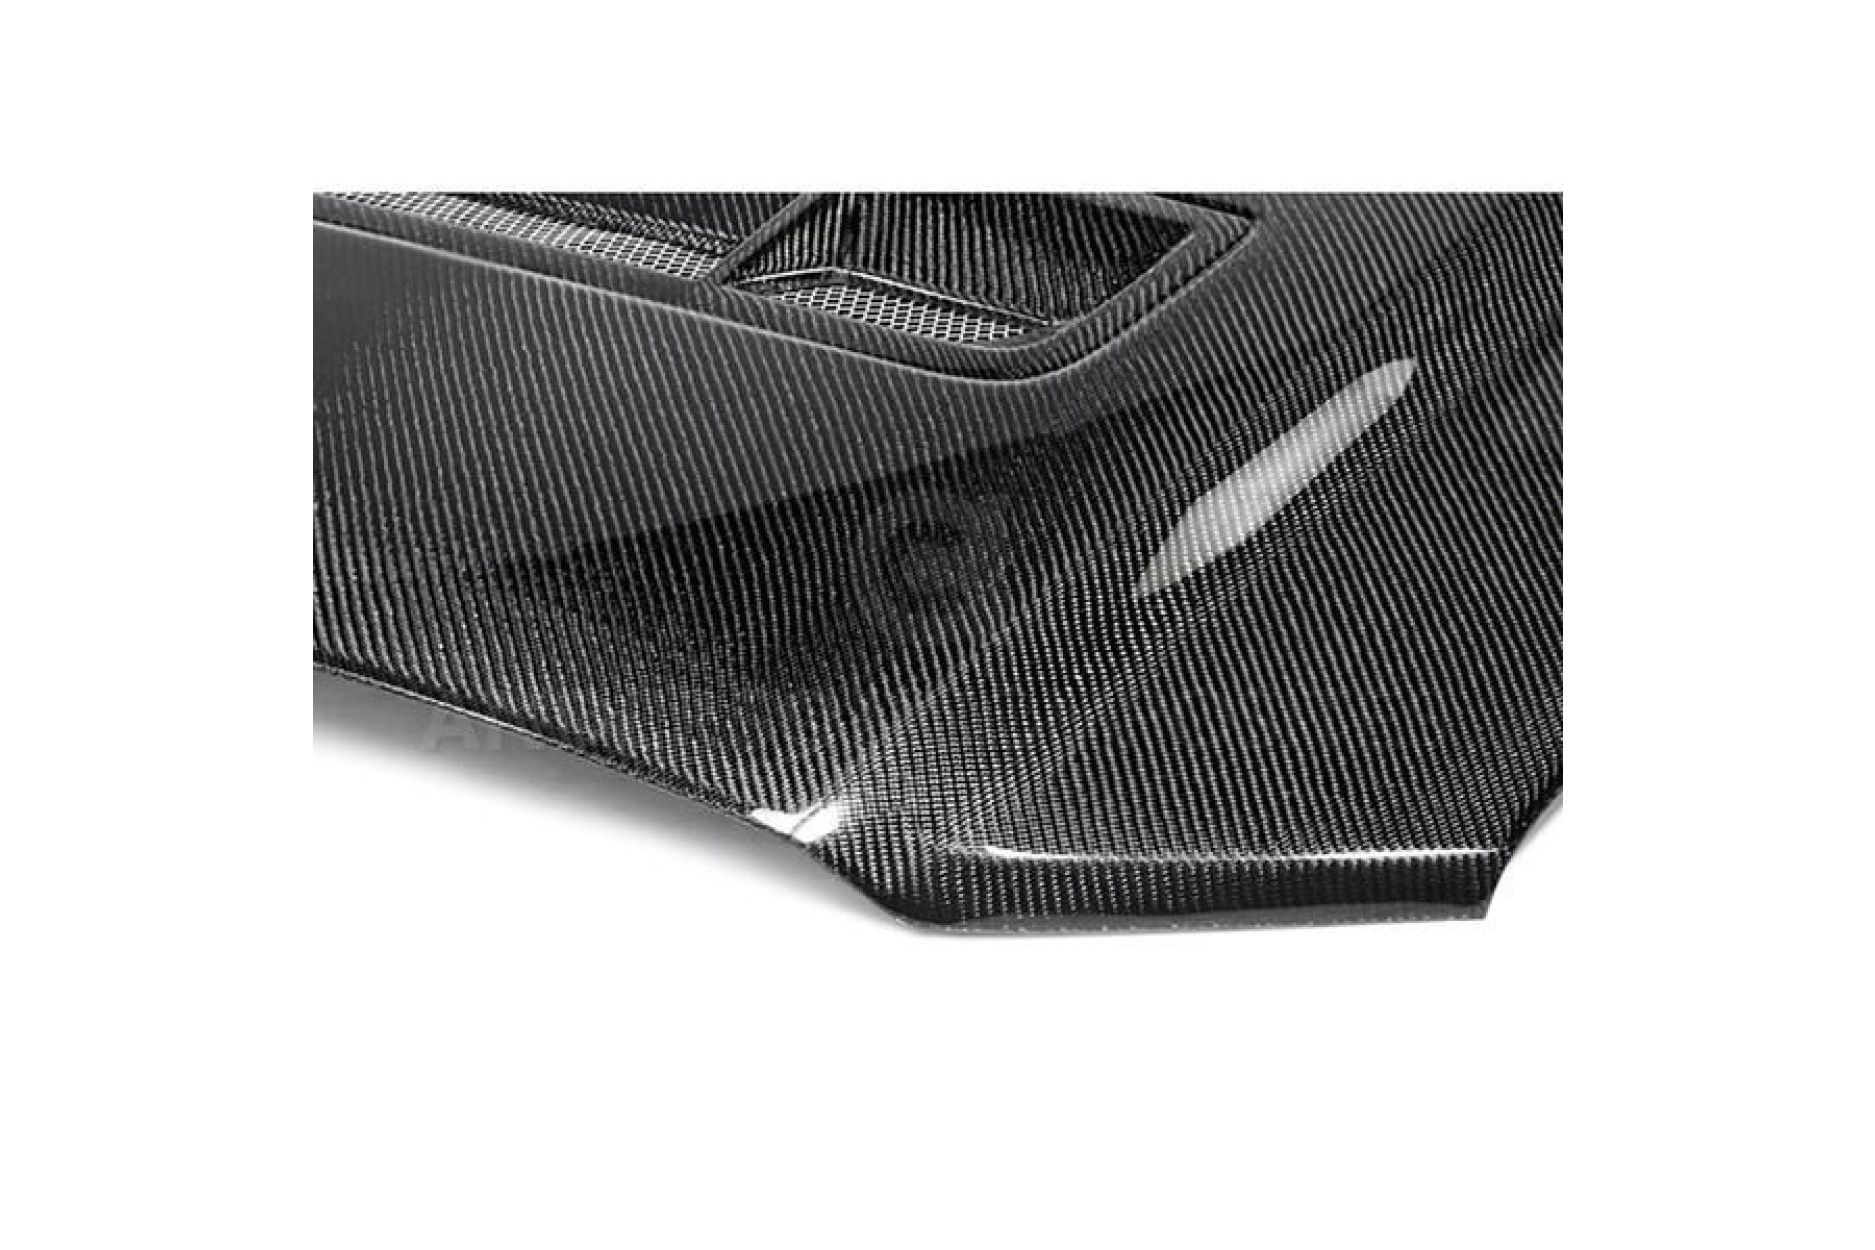 Anderson Composites Type-GT carbon fiber hood for 2010-2014 Ford Mustang GT500 and 2013-2014 Mustang GT/V6 (5) 